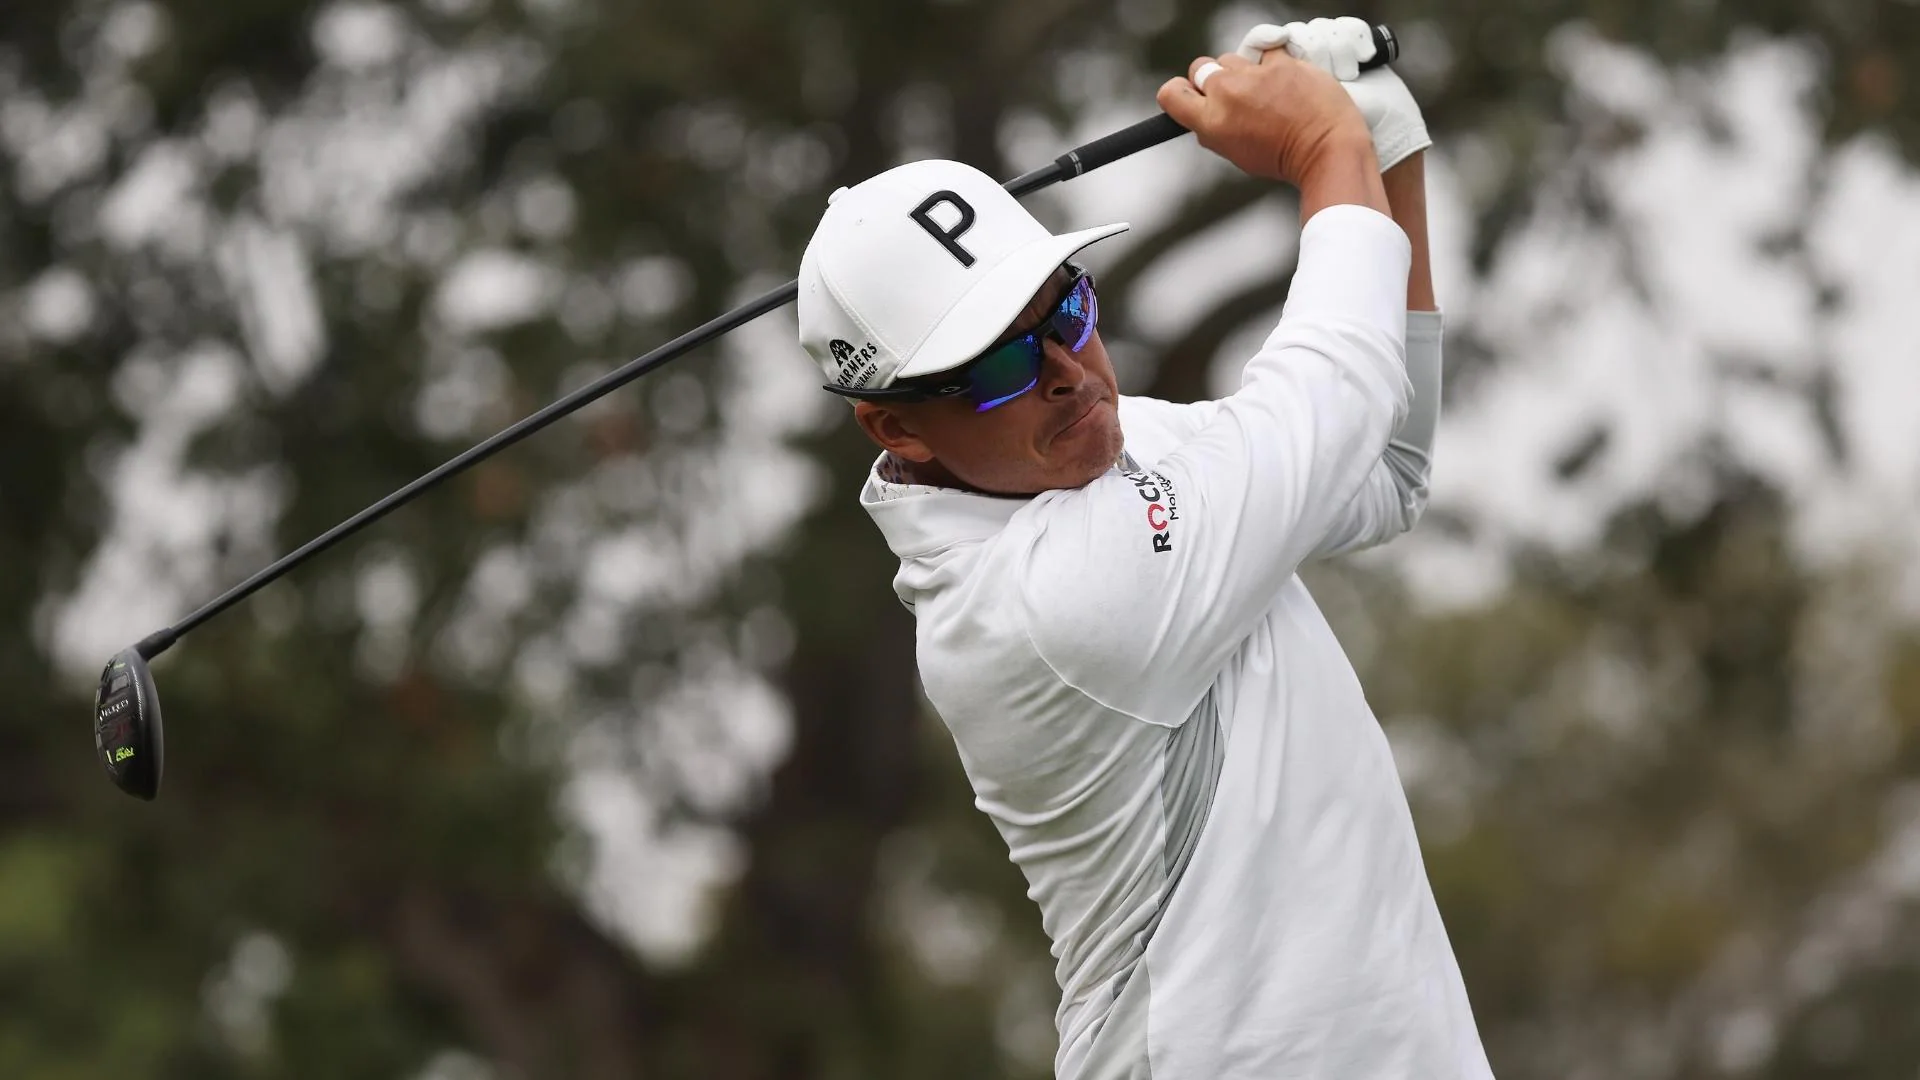 Rickie Fowler 5 under and bogey-free at Fortinet after personnel, bag changes